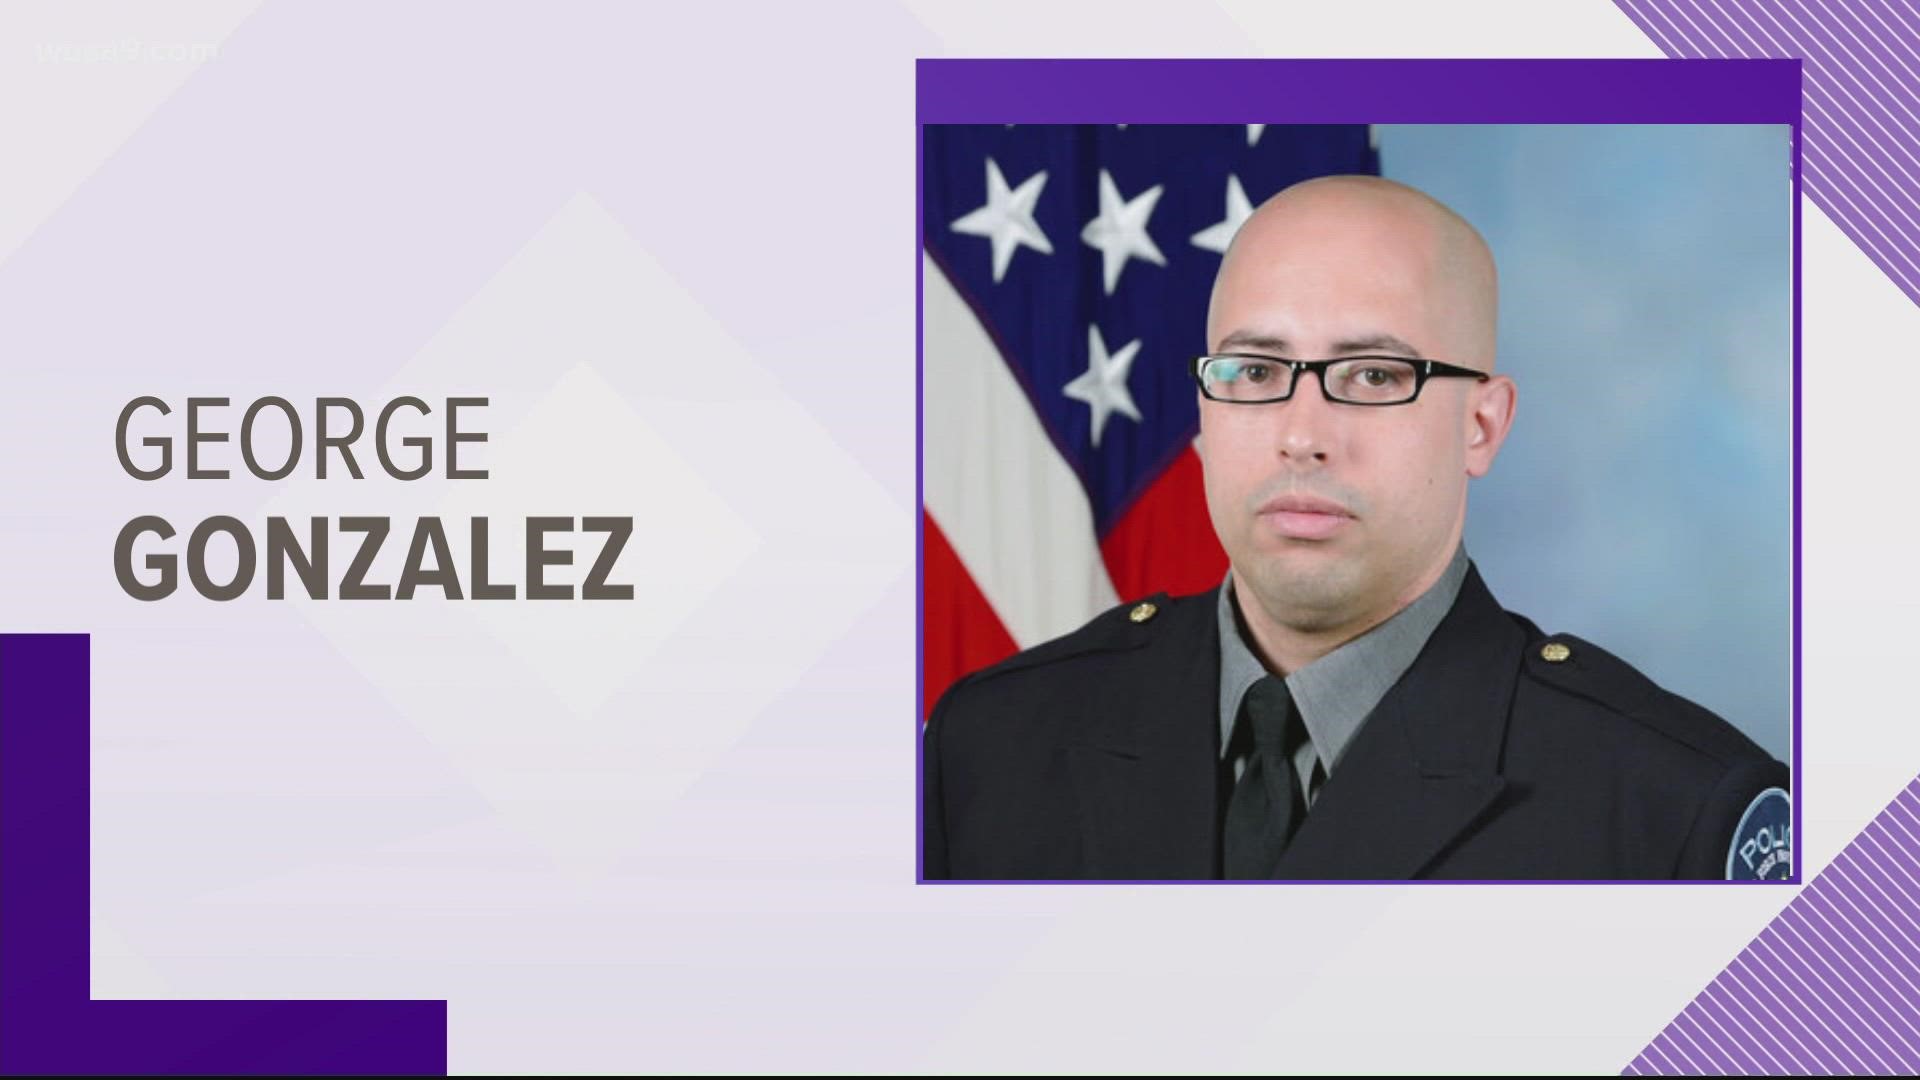 Pentagon Police Officer George Gonzalez was a military veteran who served in Iraq before he joined the Pentagon in 2018.